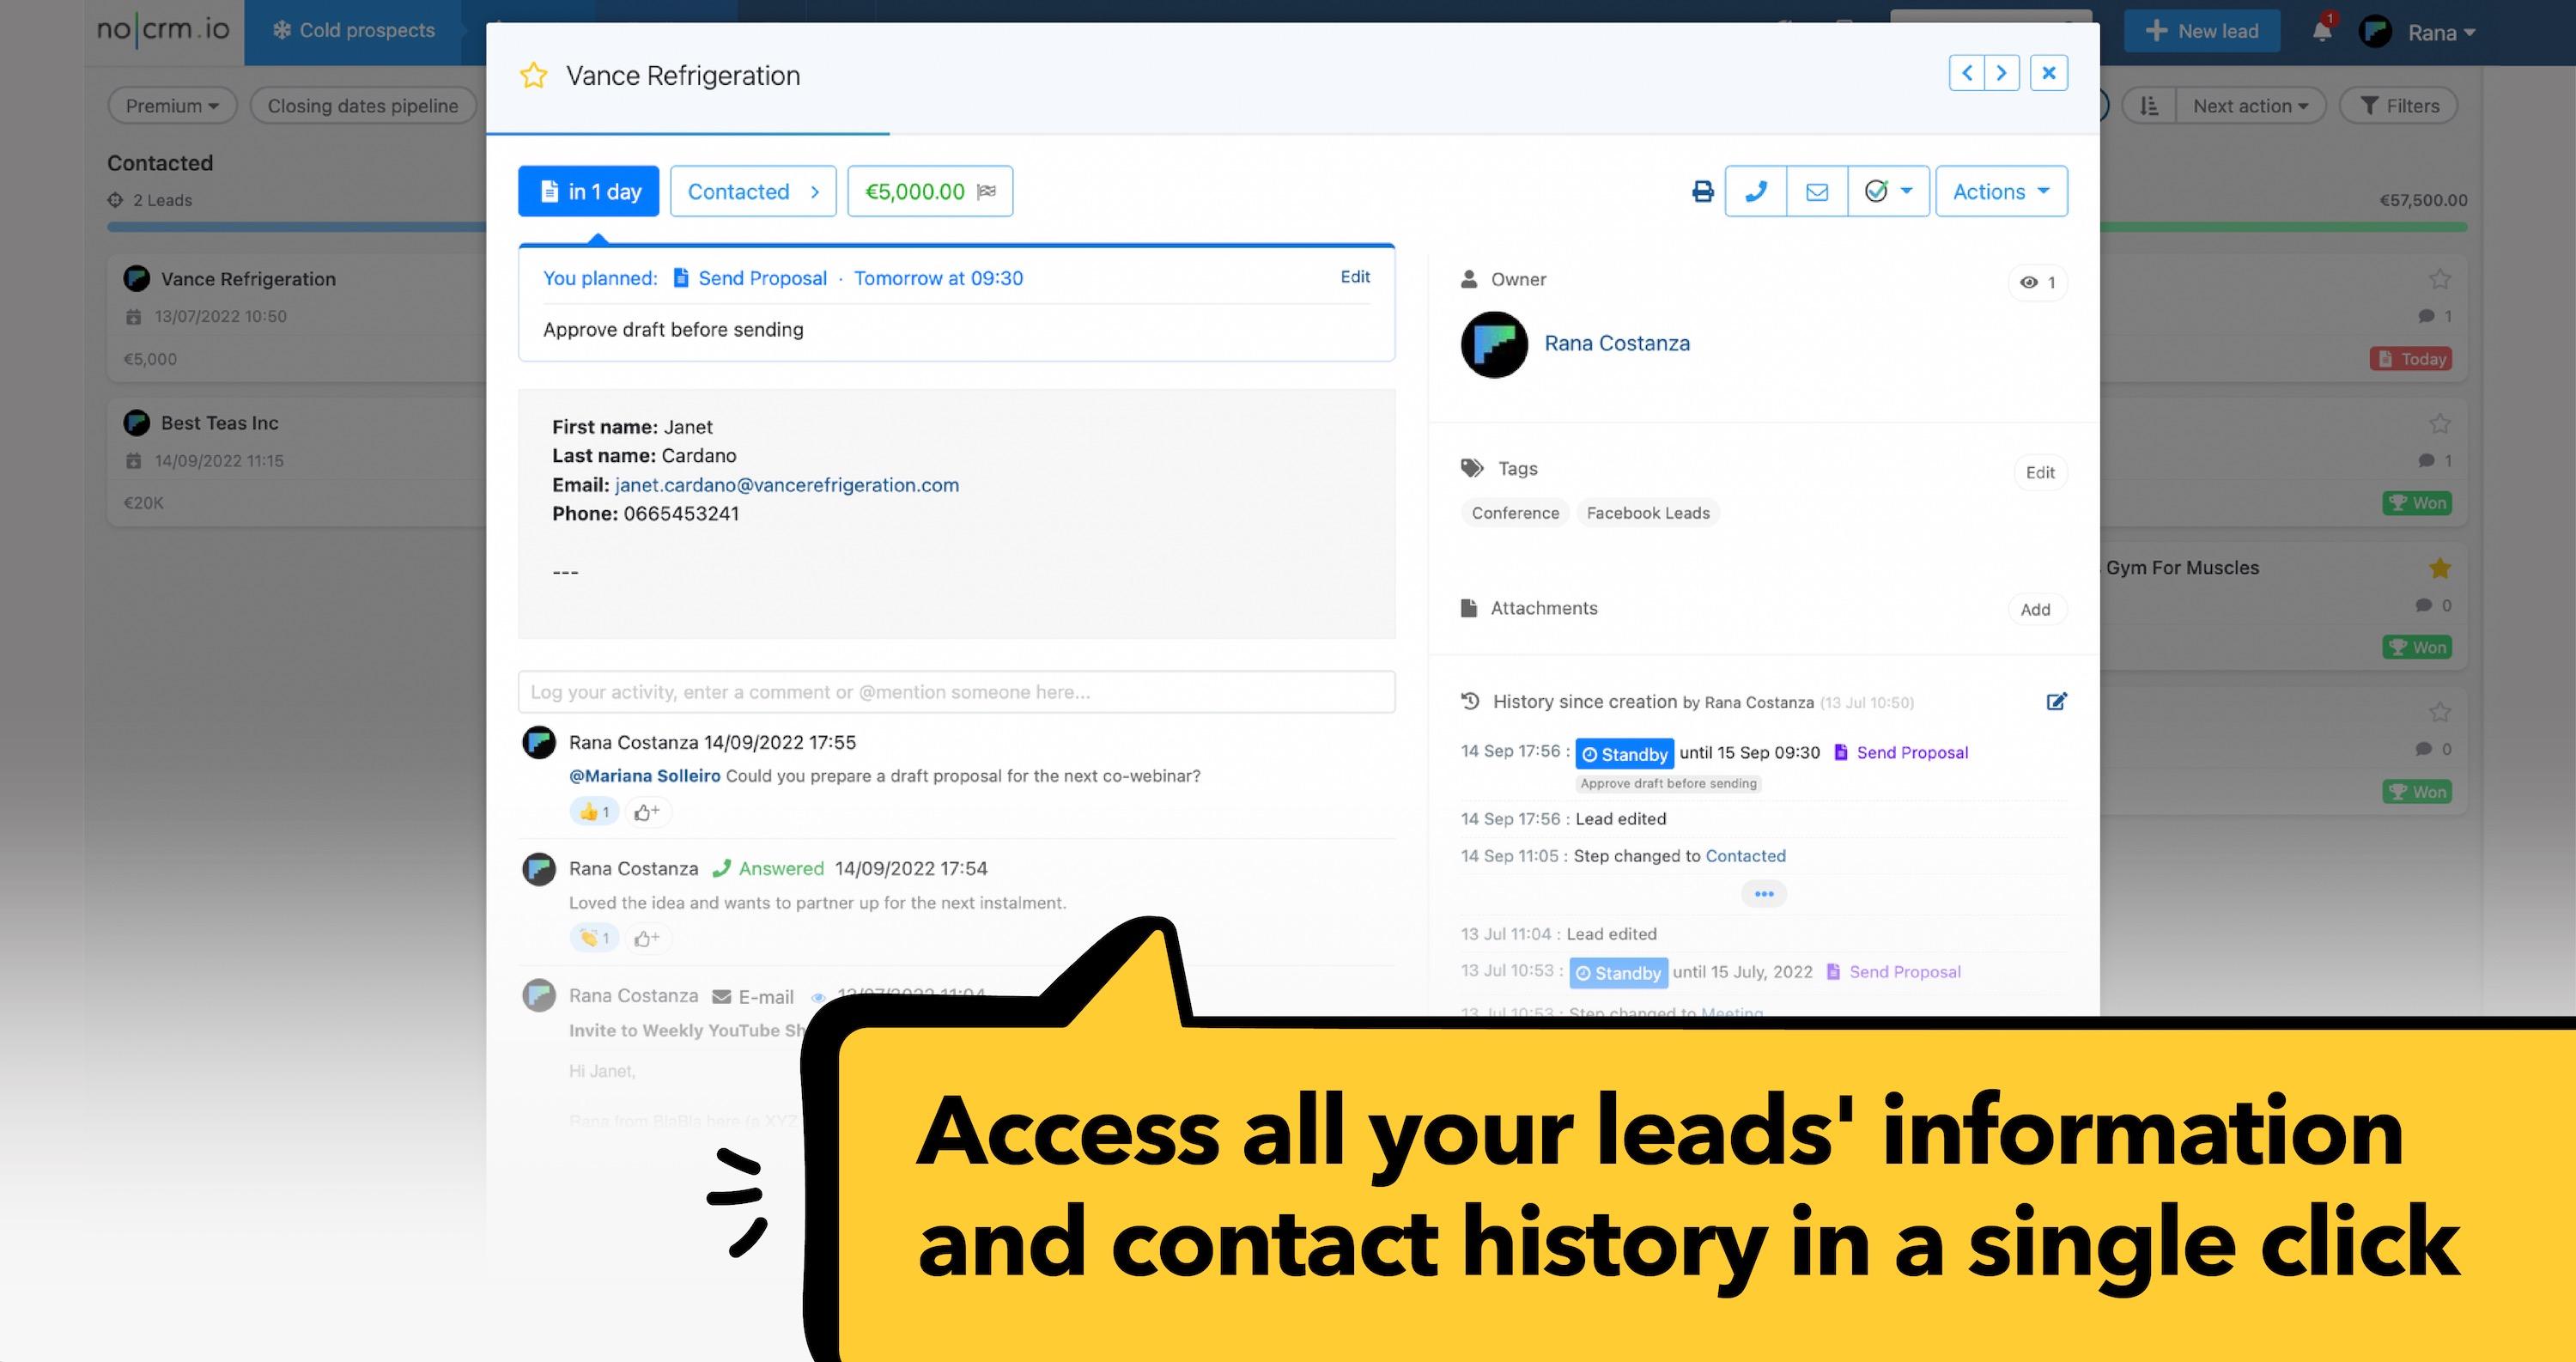 noCRM.io - Access and update your leads' information and status